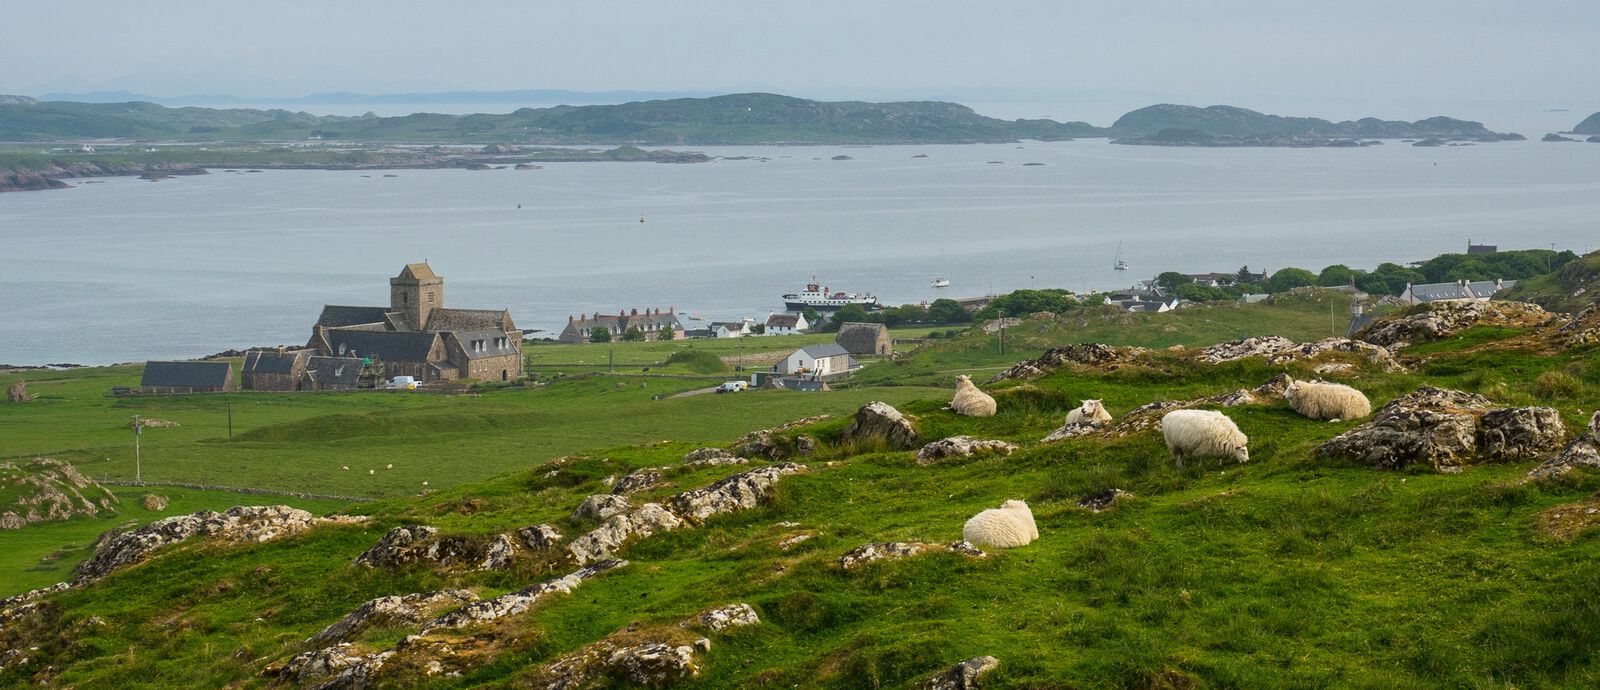 Iona Abbey and Fionphort, with Sound of Iona and Mull in the background